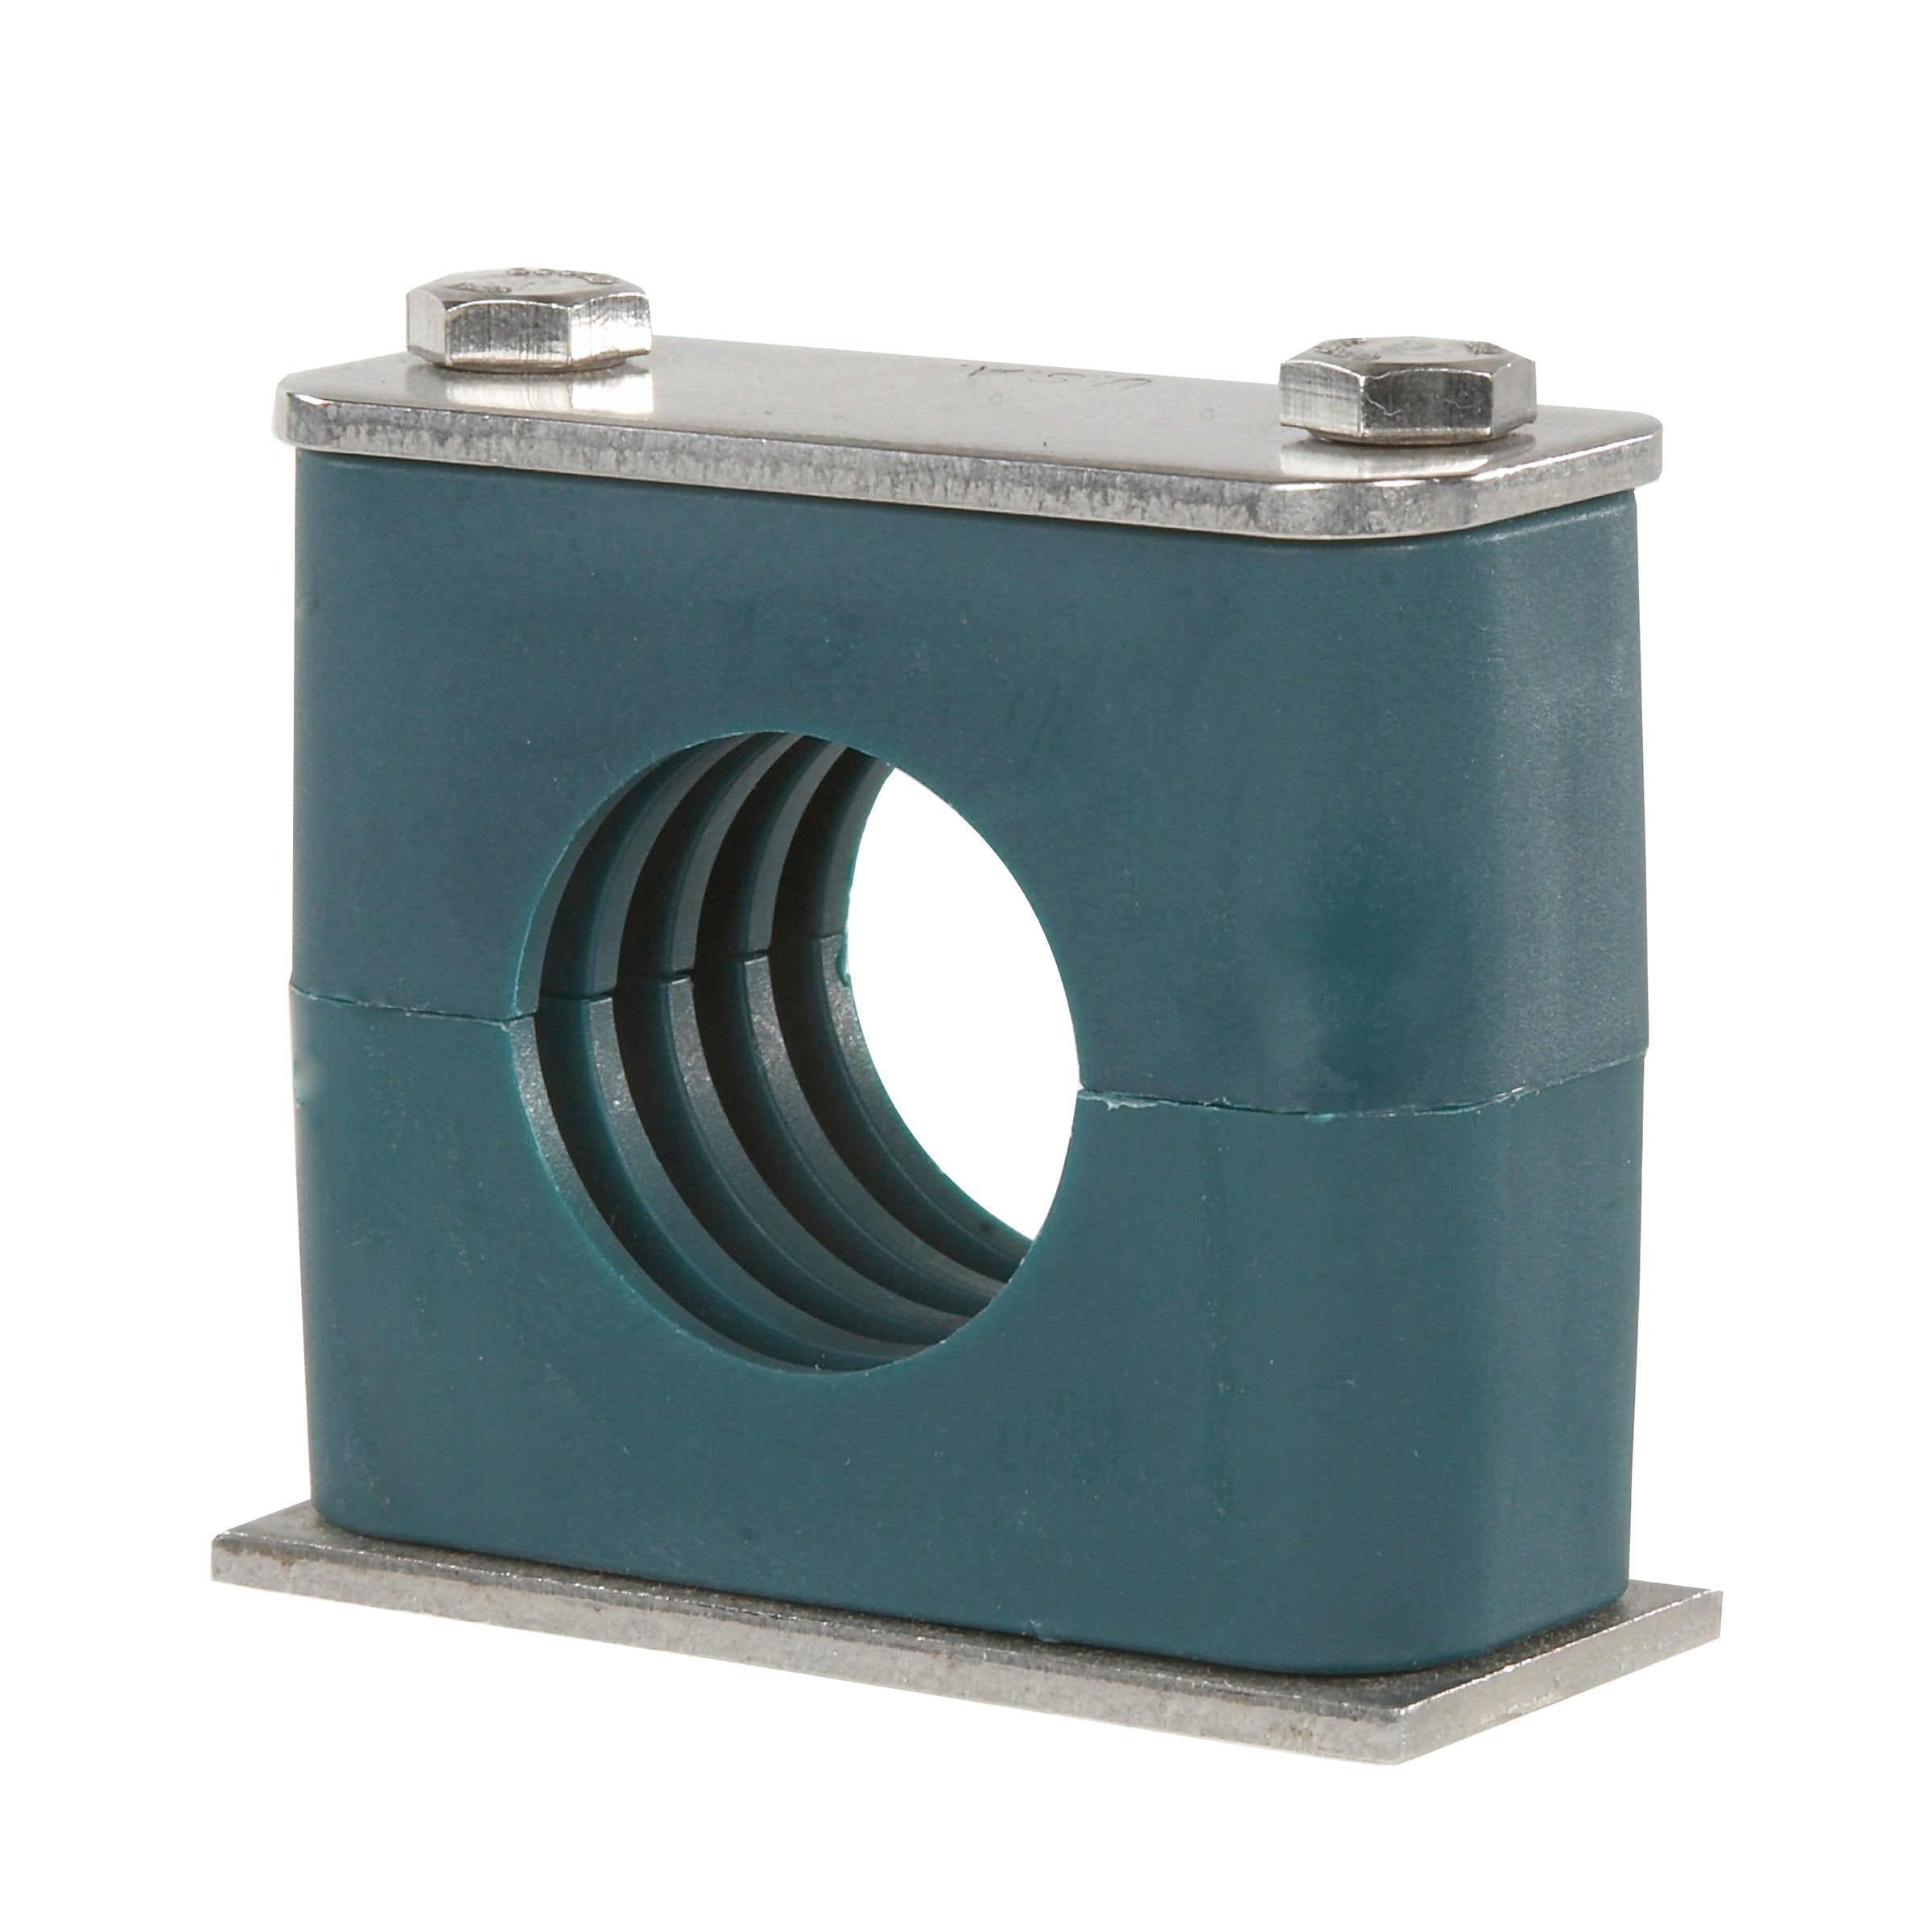 SP-888.9-PP-DP-AS-U-W5 : Stauff Clamp, Single Weld Plate, 3.5" (88.9mm) OD, for 3" Pipe, Green PP Insert, Profiled Interior, 316SS